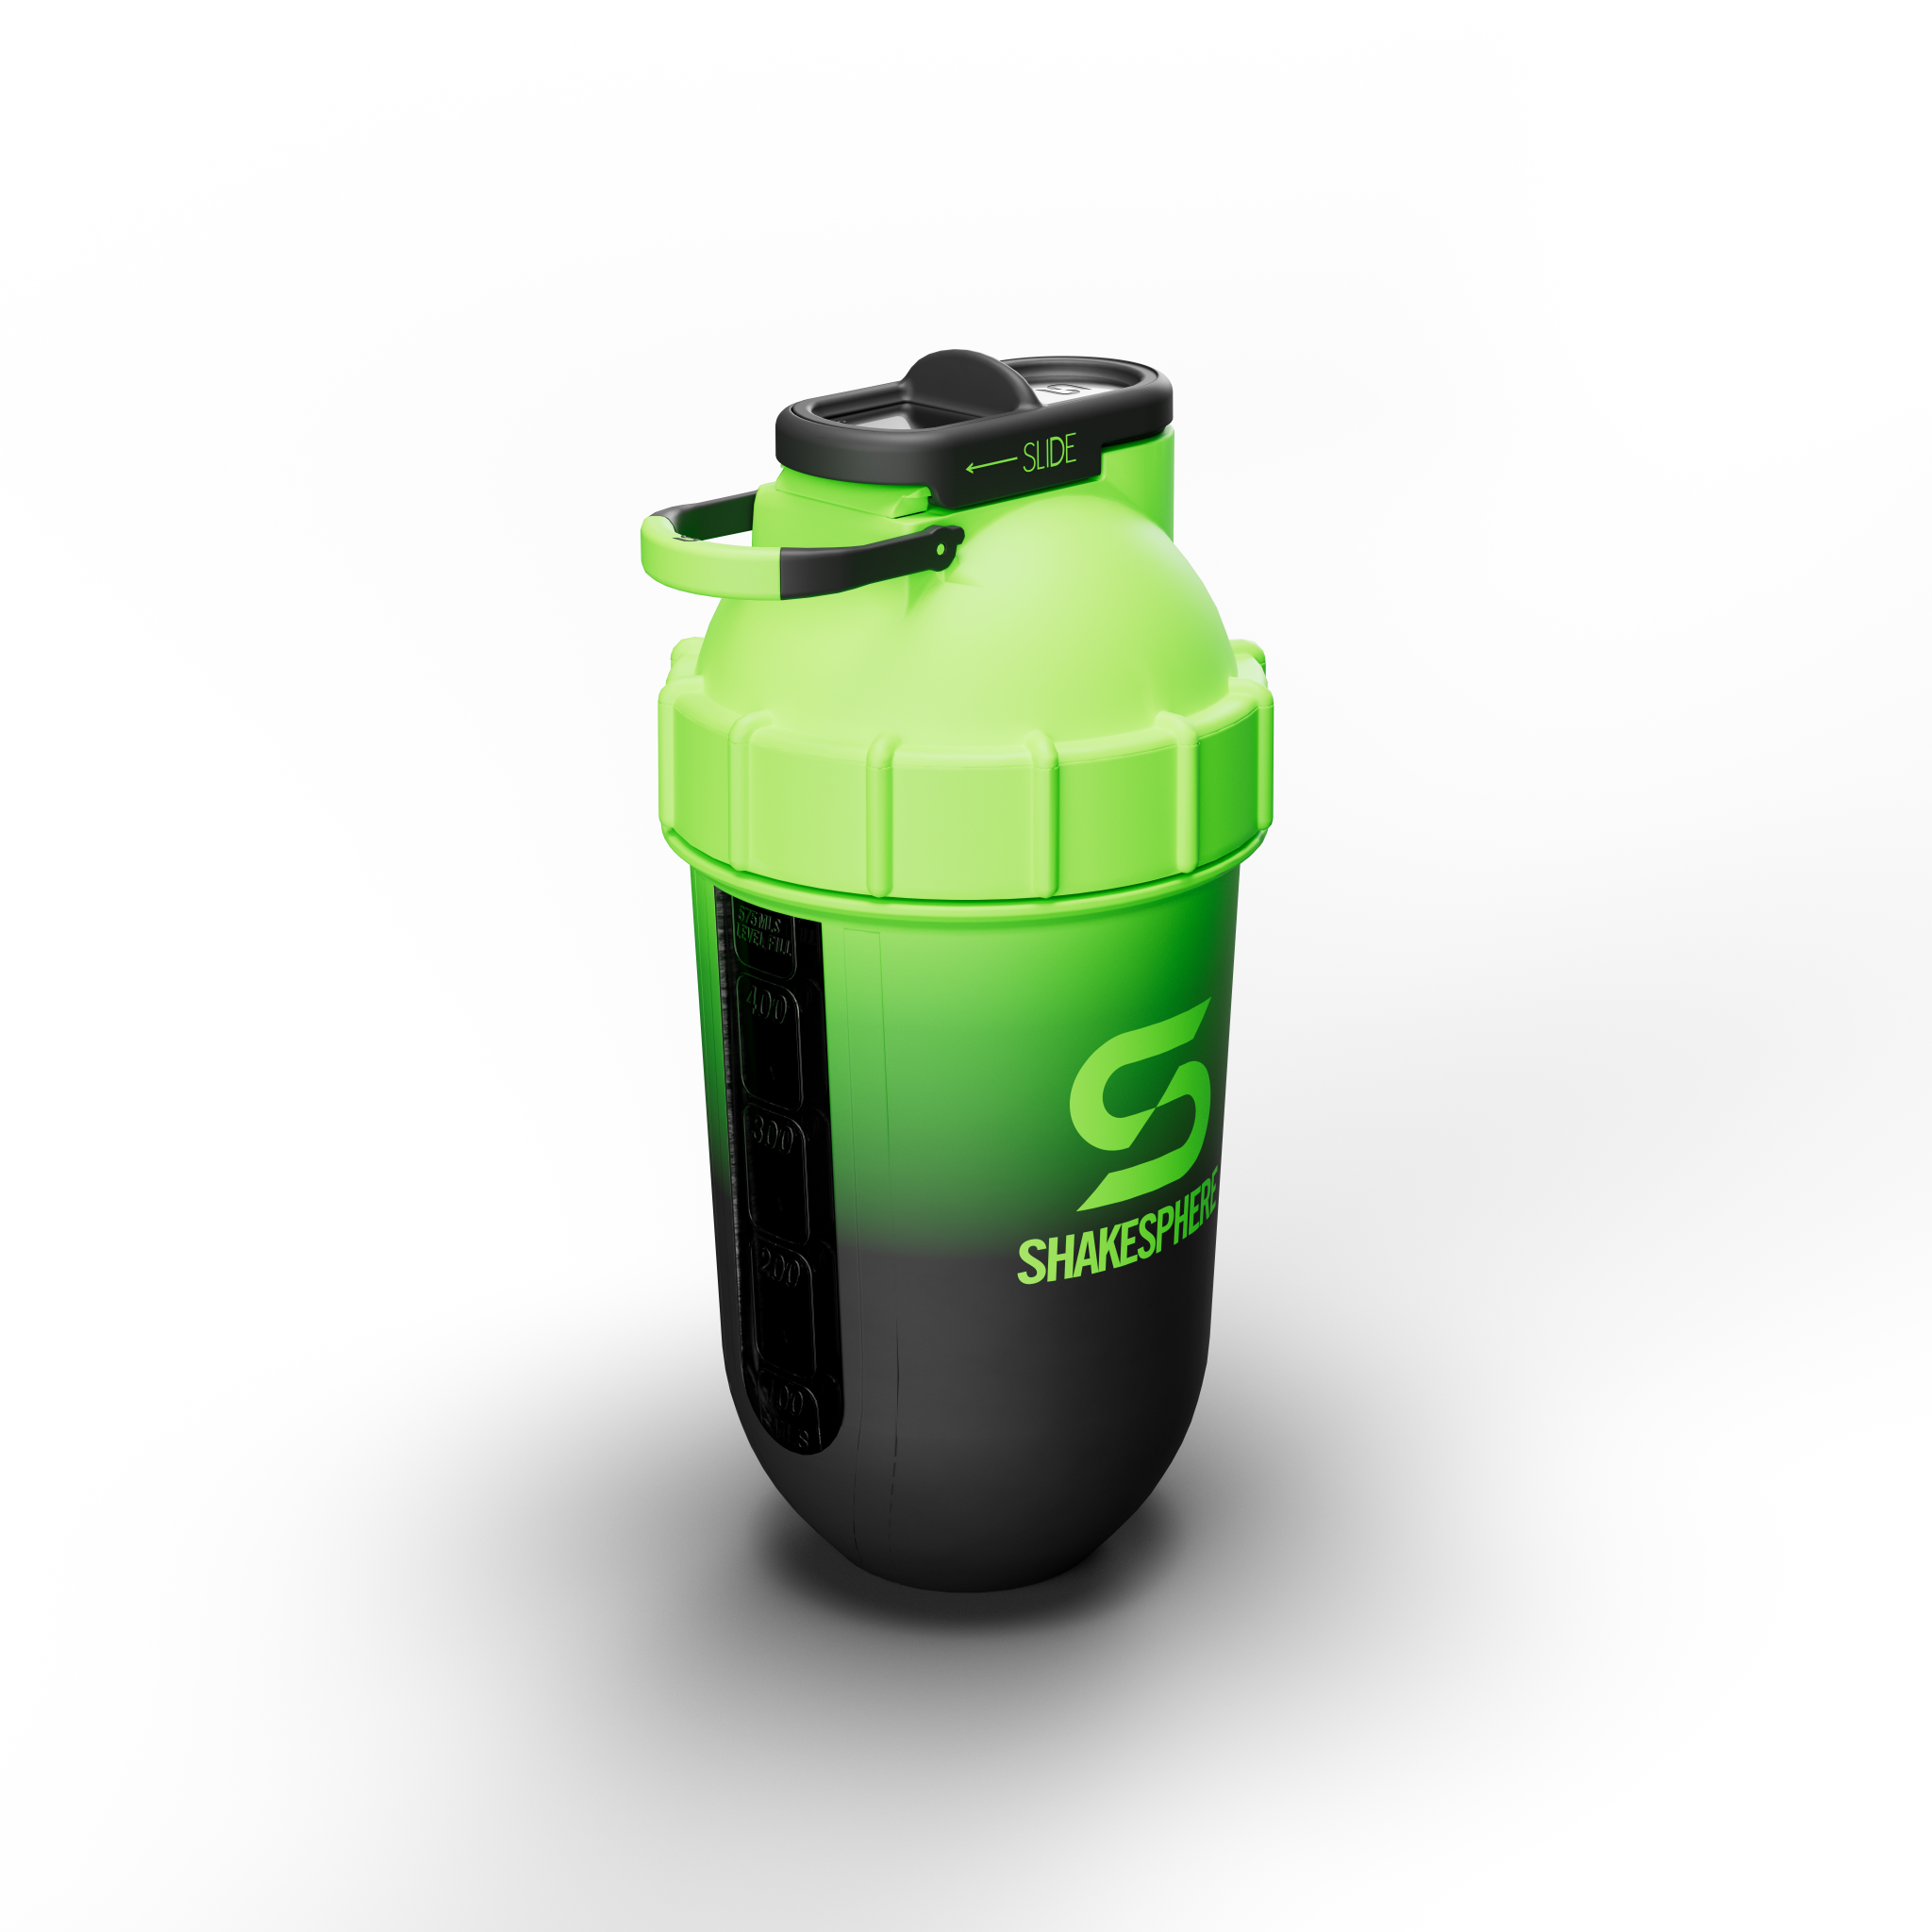 ShakeSphere Tumbler Cooler Shaker - Protein Shaker Bottle and Smoothie Cup, 24 oz - Bladeless Blender Cup Raw Fruit, No Blending Ball - Ombre Green